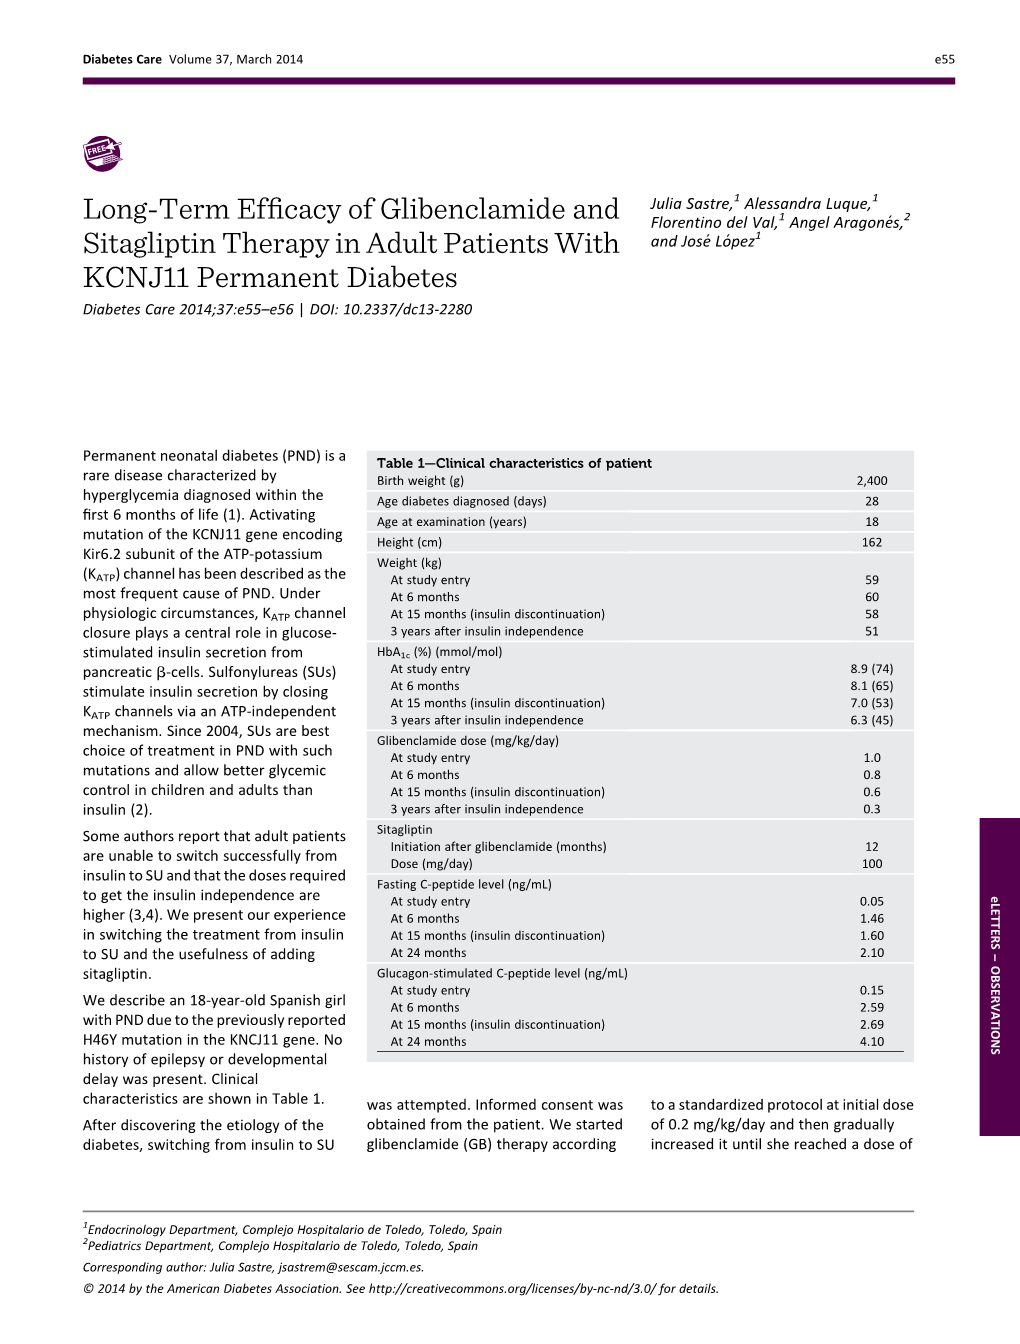 Long-Term Efficacy of Glibenclamide and Sitagliptin Therapy in Adult